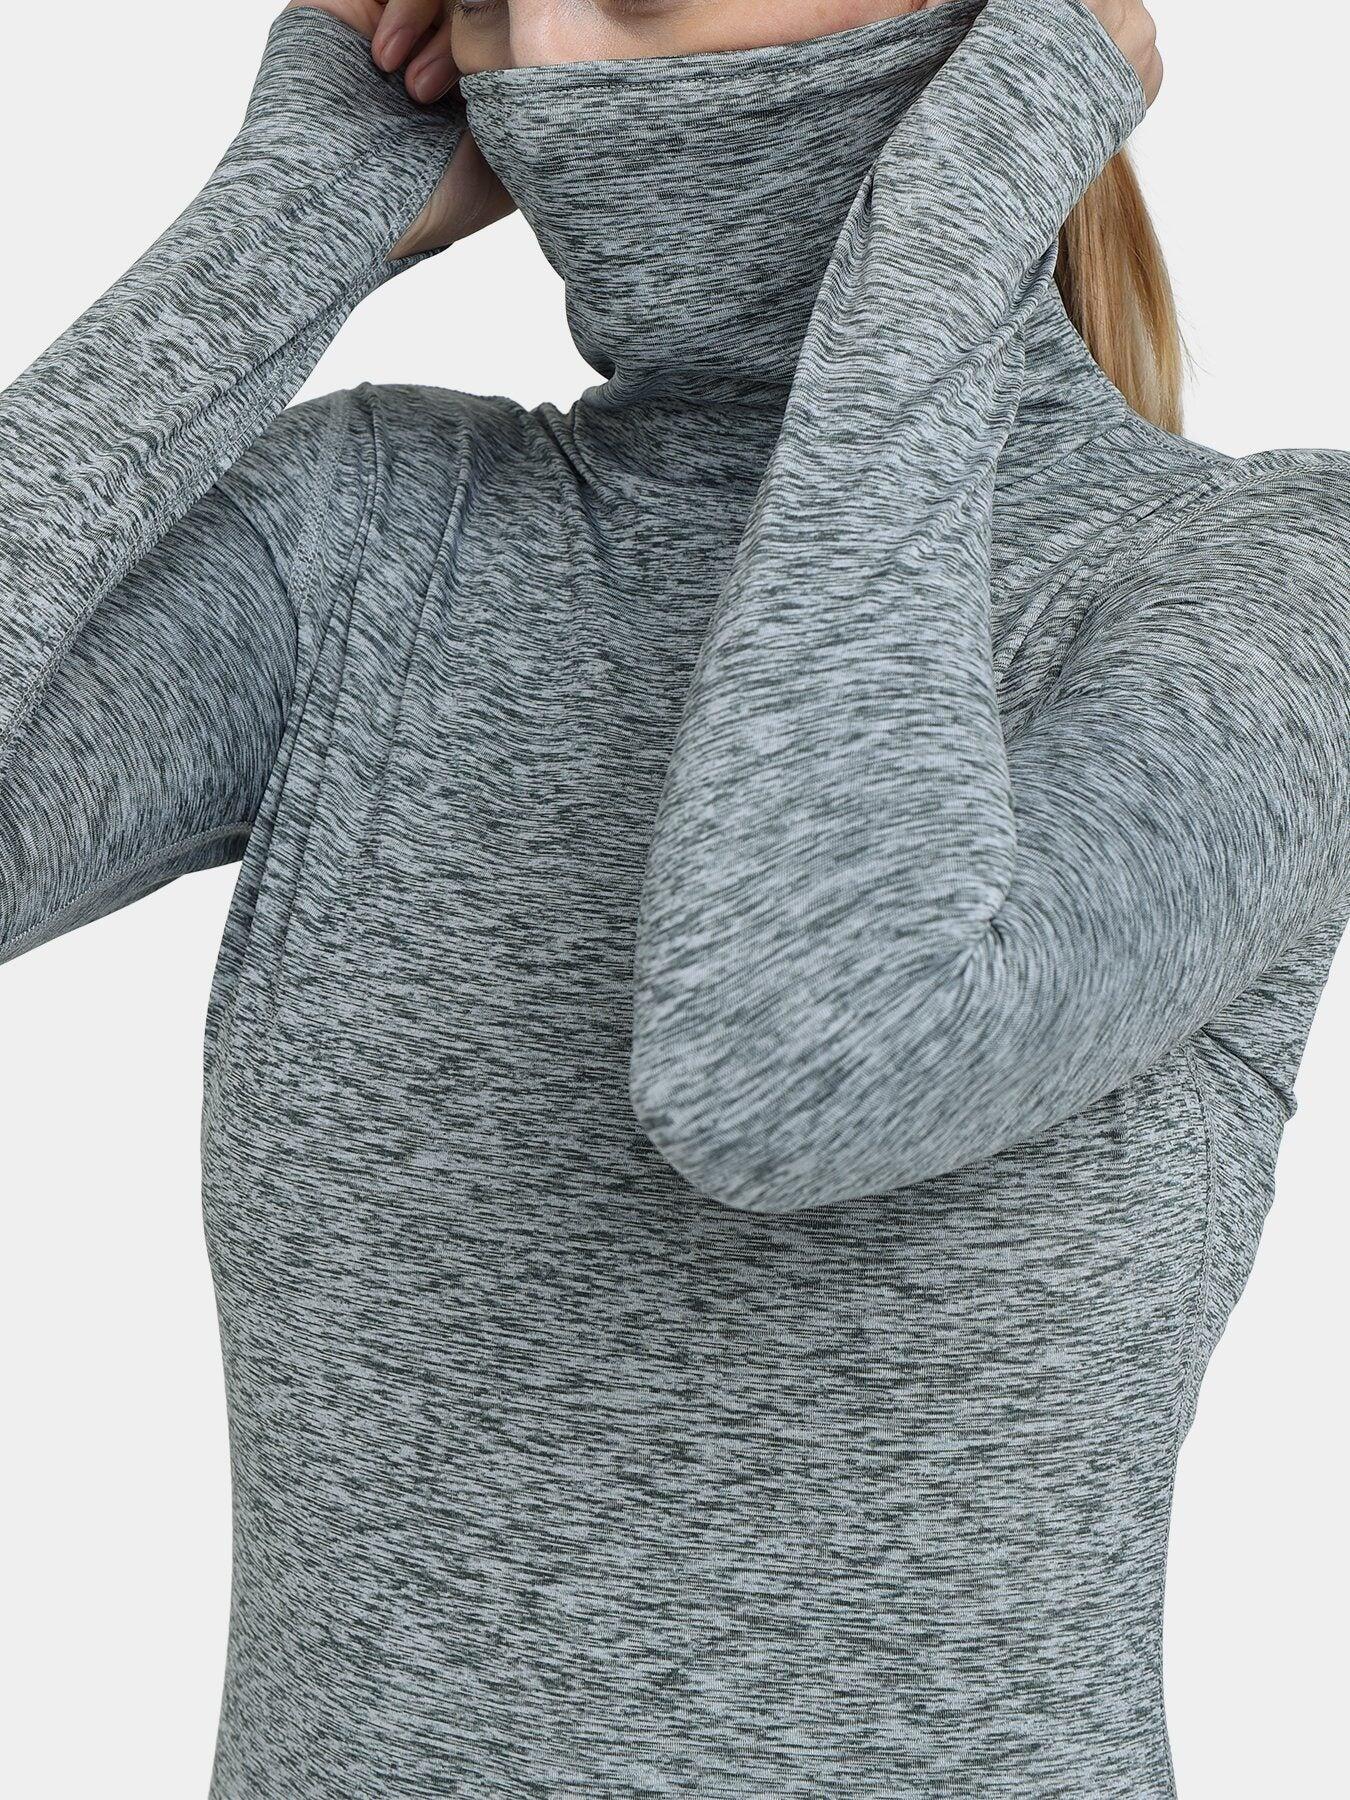 Women's Thermal Funnel Neck Top - Quiet Shade Marl 3/5